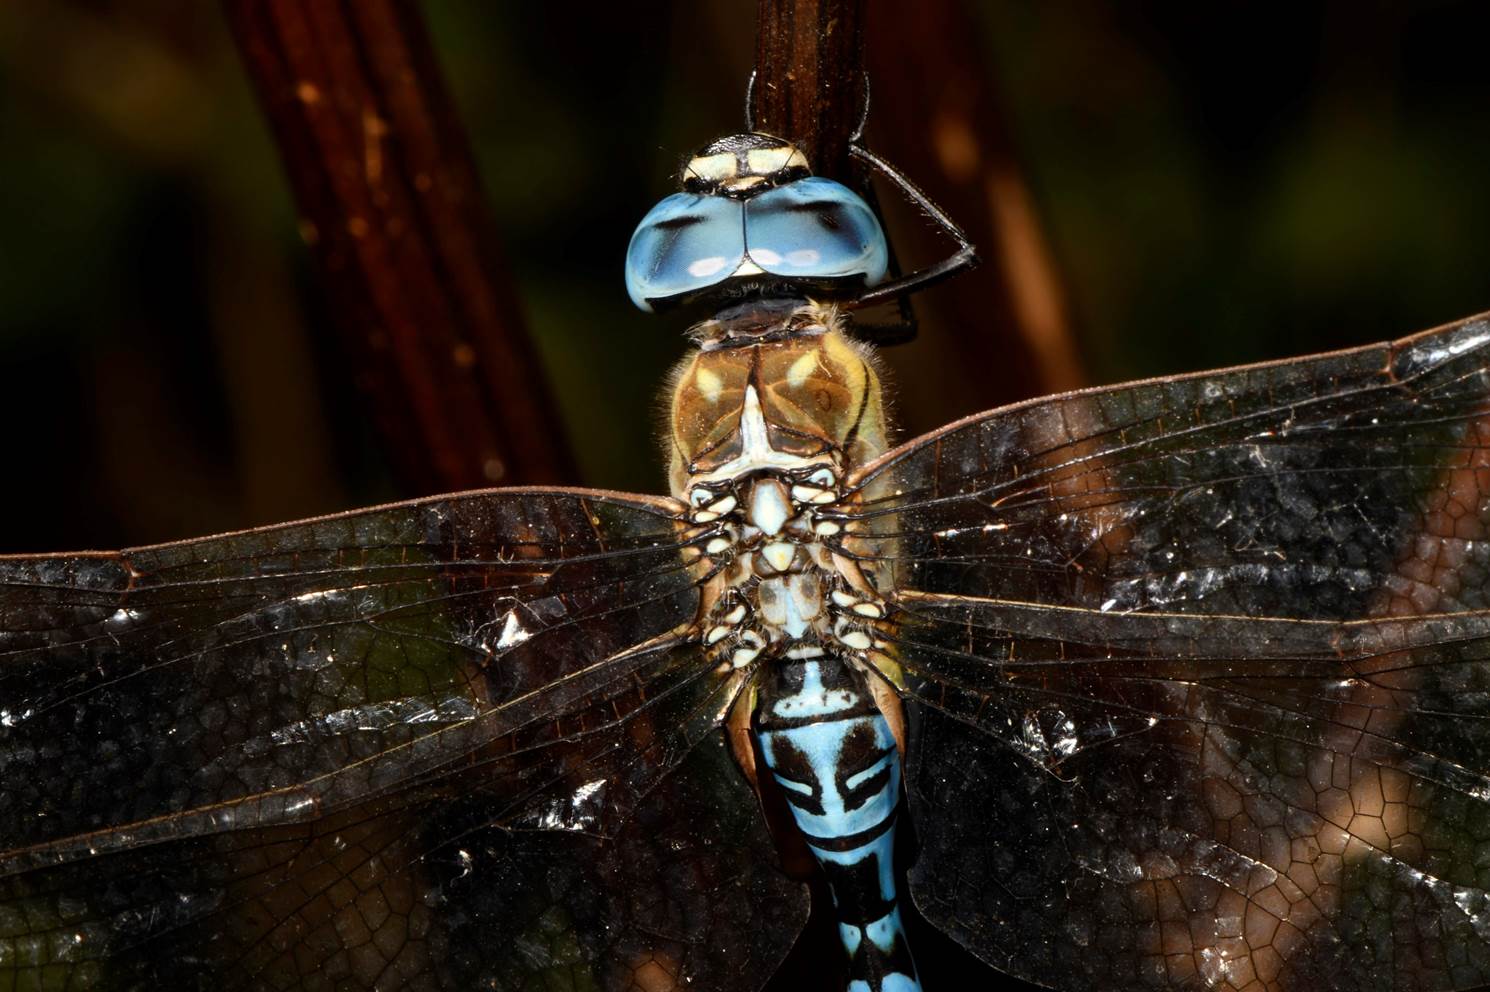 A close up of a dragonfly

Description automatically generated